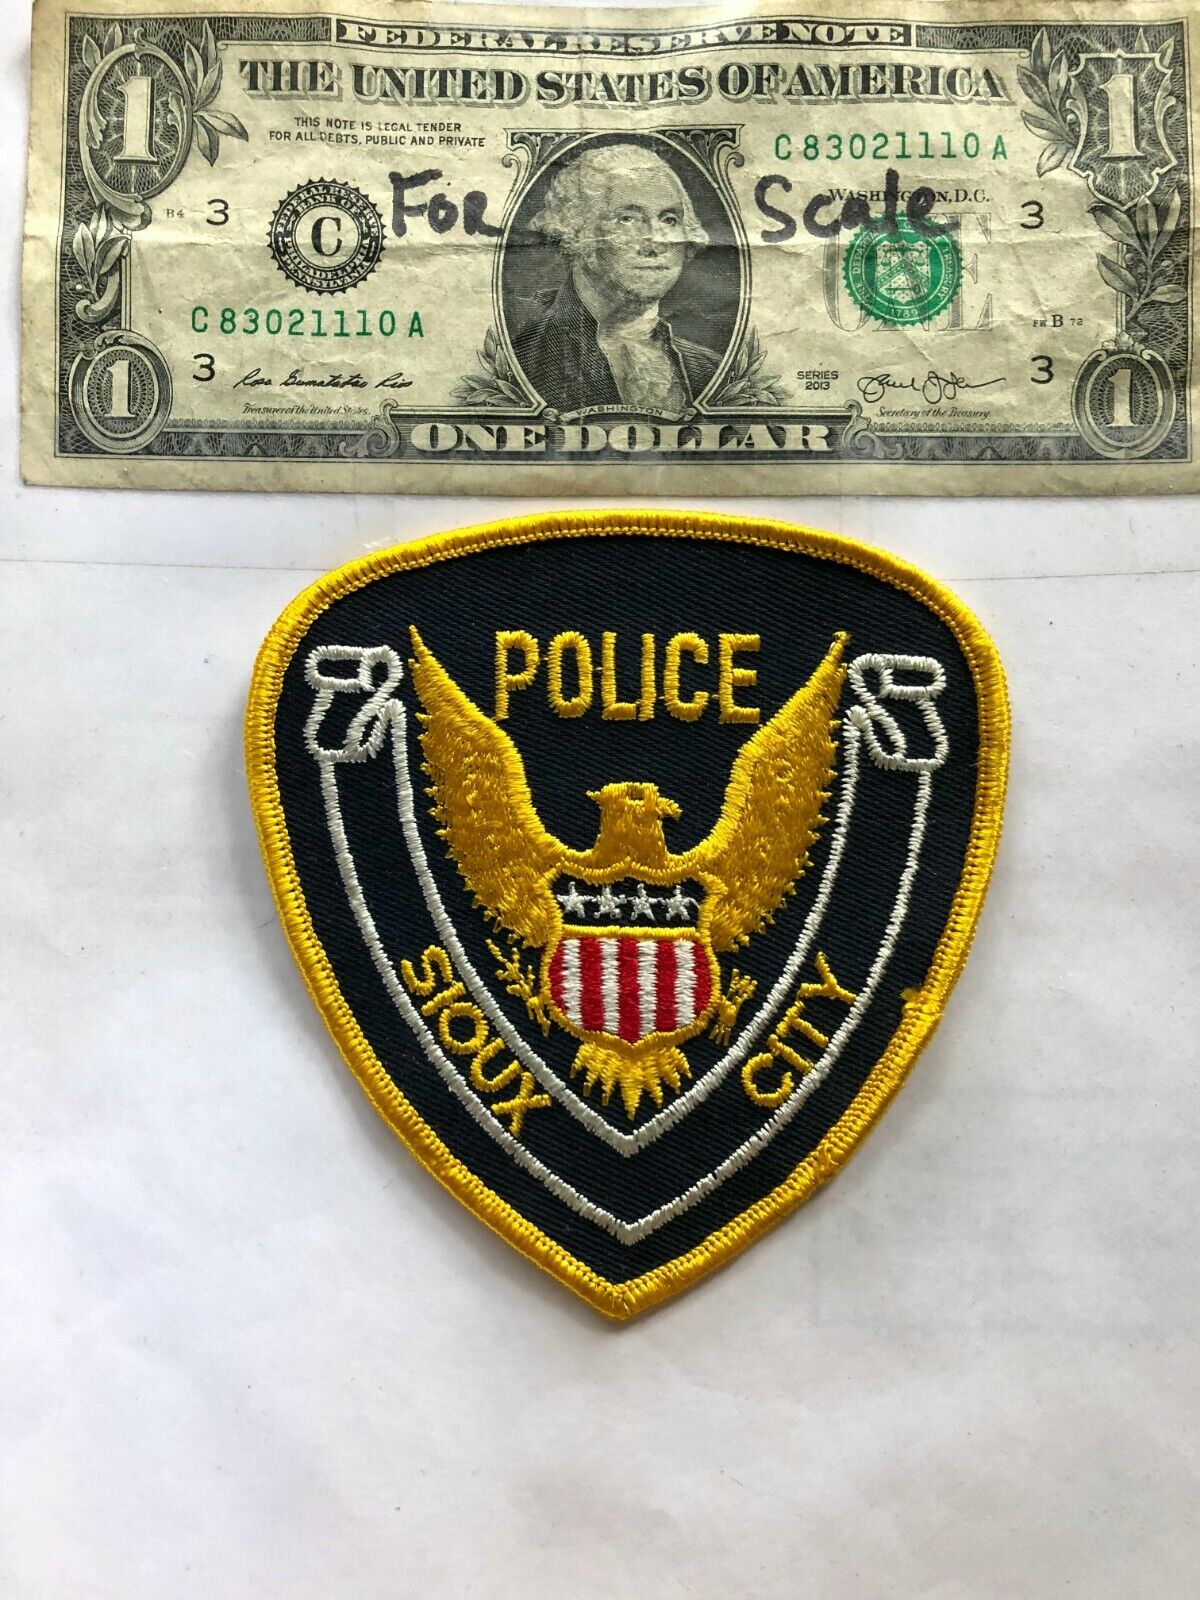 Sioux City Iowa Police Patch Un-sewn Great Shape